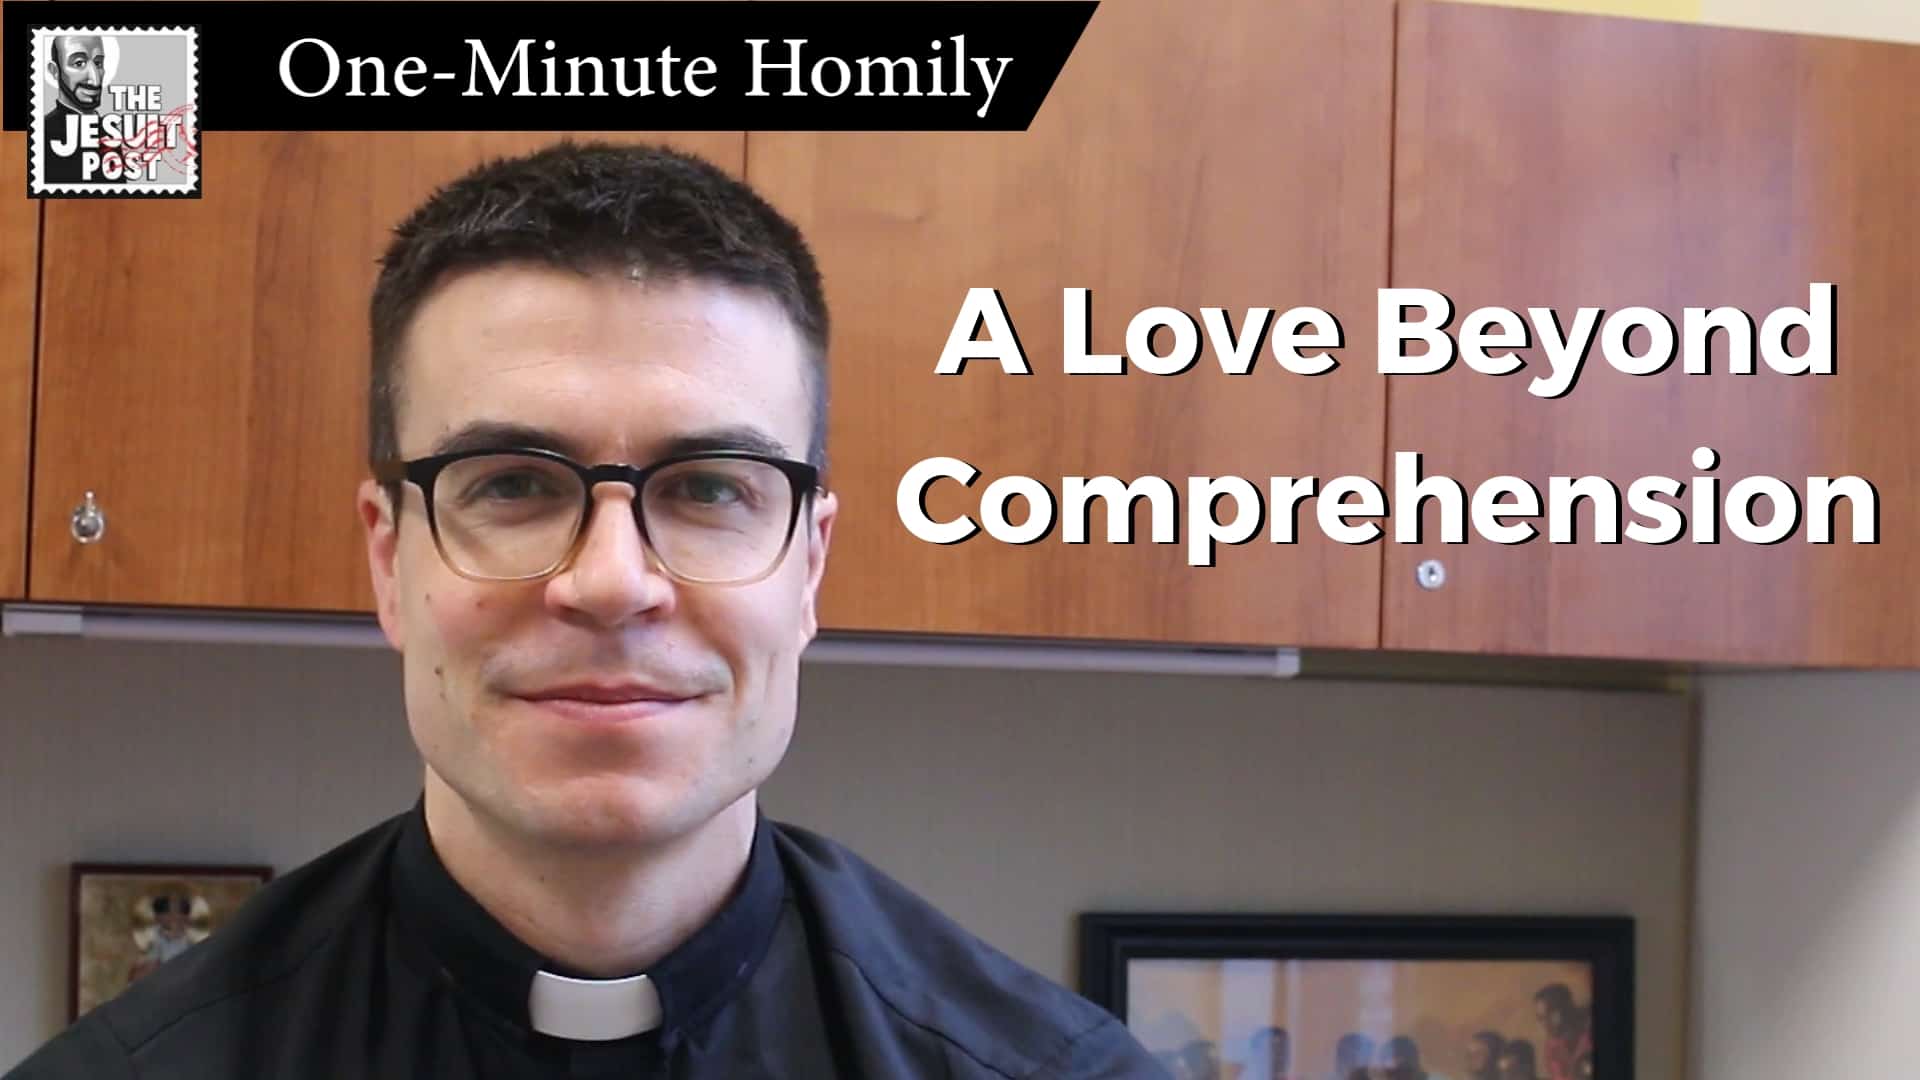 One-Minute Homily: “A Love Beyond Comprehension”